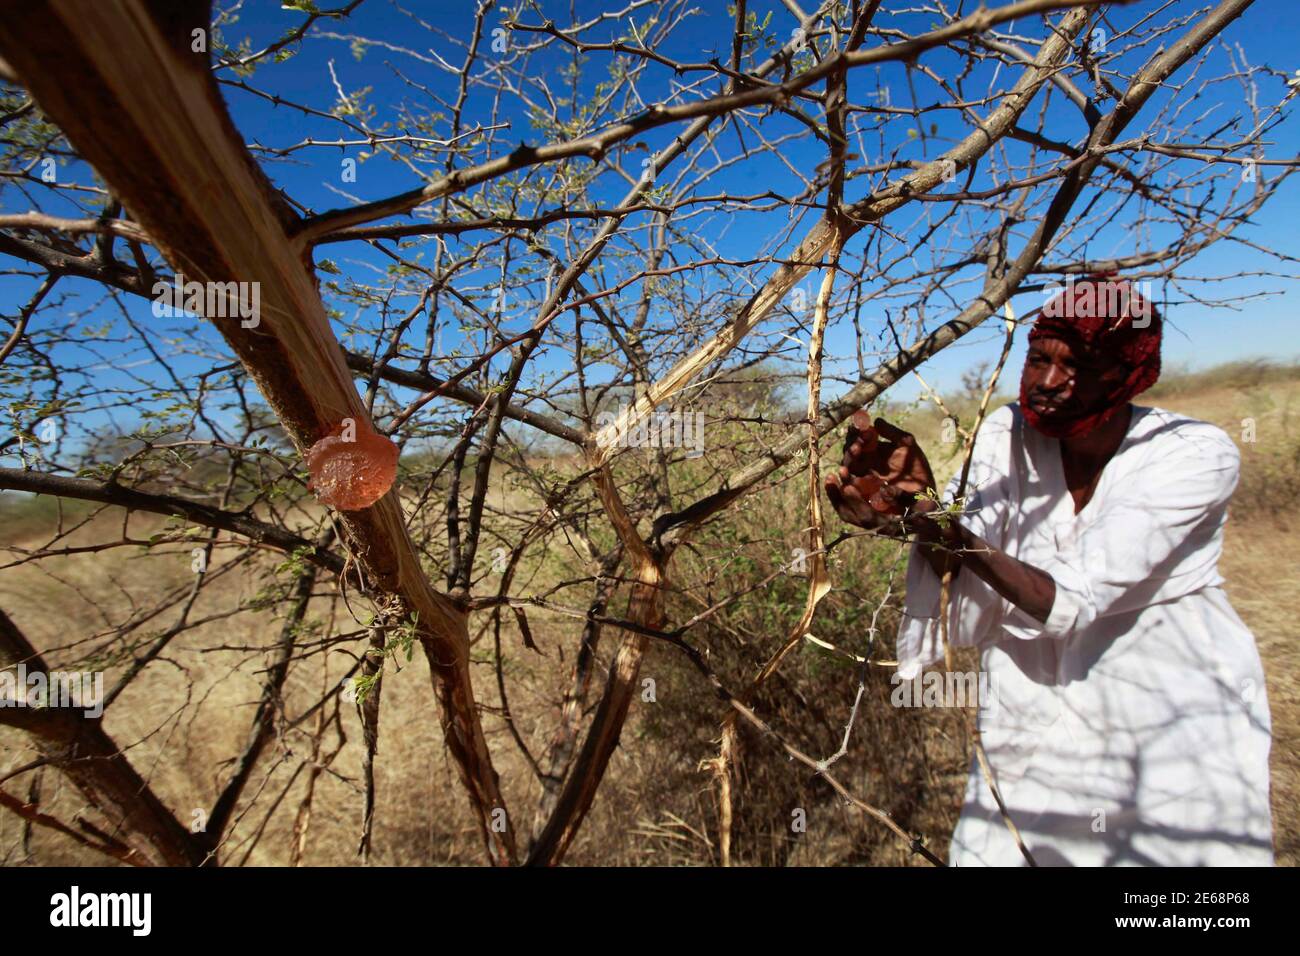 A farmer collects gum arabic from an Acacia tree in the western Sudanese town of El-Nahud that lies in the main farming state of North Kordofan December 18, 2012. Business is booming in the western Sudanese town of El-Nahud thanks to rising global demand for gum arabic, a natural and edible gum taken from acacia trees growing in the area. Picture taken December 18, 2012. To match Feature SUDAN-GUMARABIC/     REUTERS/Mohamed Nureldin Abdallah (SUDAN - Tags: AGRICULTURE BUSINESS) EMPLOYMENT) Stock Photo